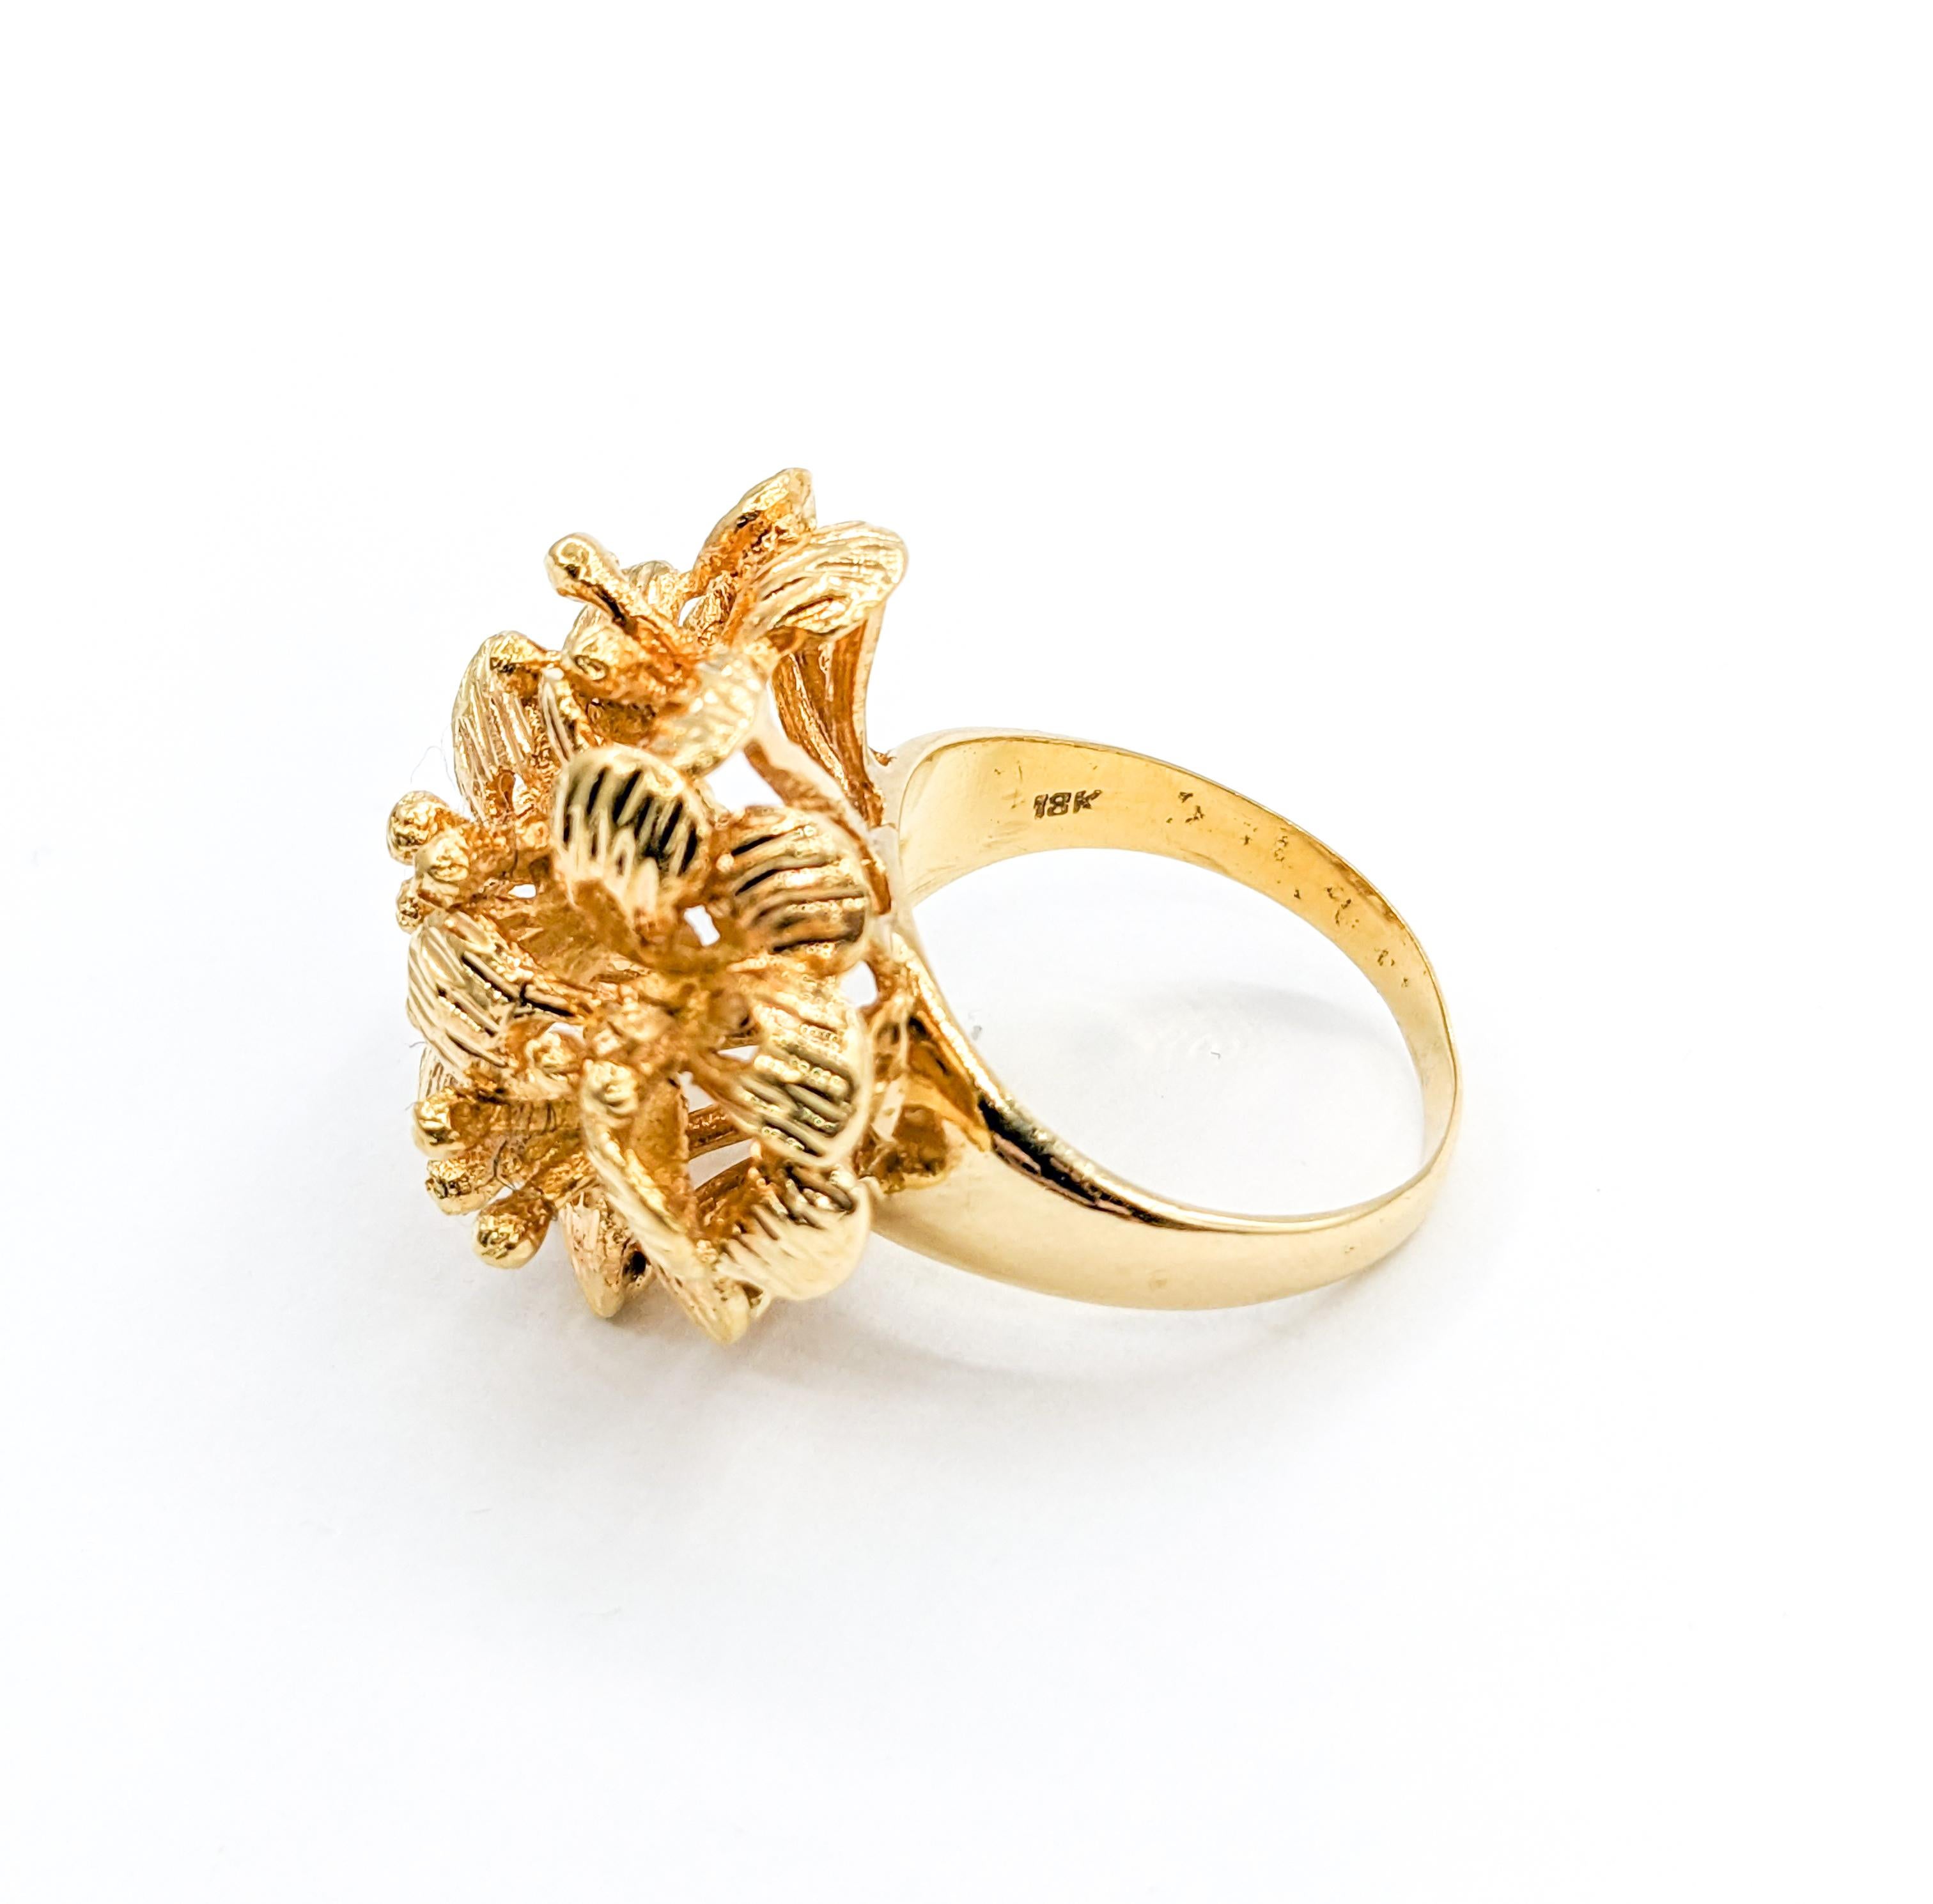 Lovely Vintage Floral Cluster Ring in Gold

Embrace the allure of yesteryears with this beautifully crafted vintage floral cluster ring in 18K yellow gold. Its design, reminiscent of a bouquet of hibiscus flowers, evokes an era of timeless elegance.